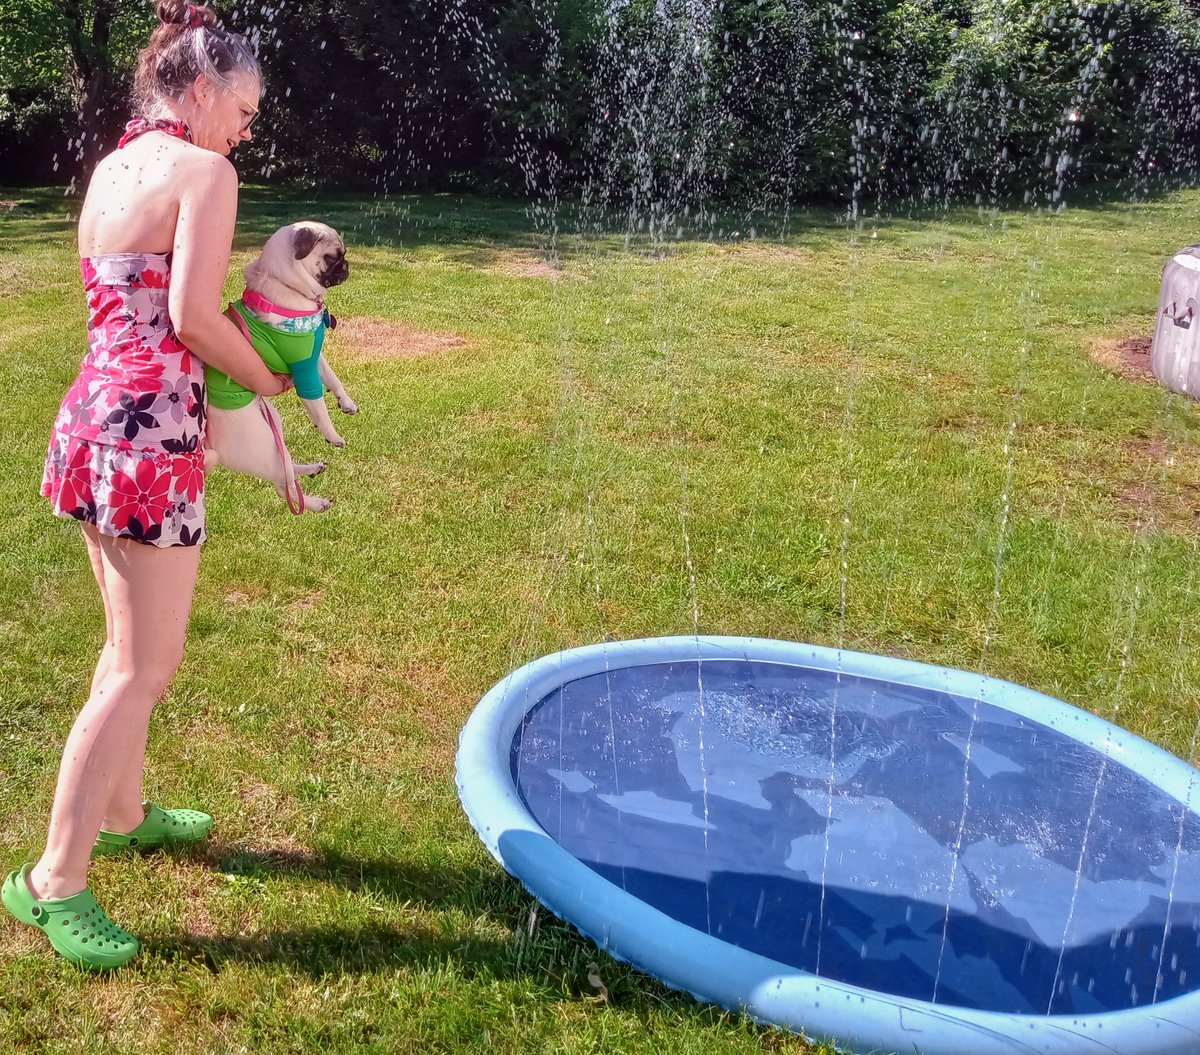 #SundayFun Princess Puggy in a swim shirt trying out the splash pad!🩱👸🐾😎 She was afraid so I had to hold her up so sorry for showing me!lol #pugs #pug #dogsoftwitter #dogsofx #summer #puglove #puglife #puglover